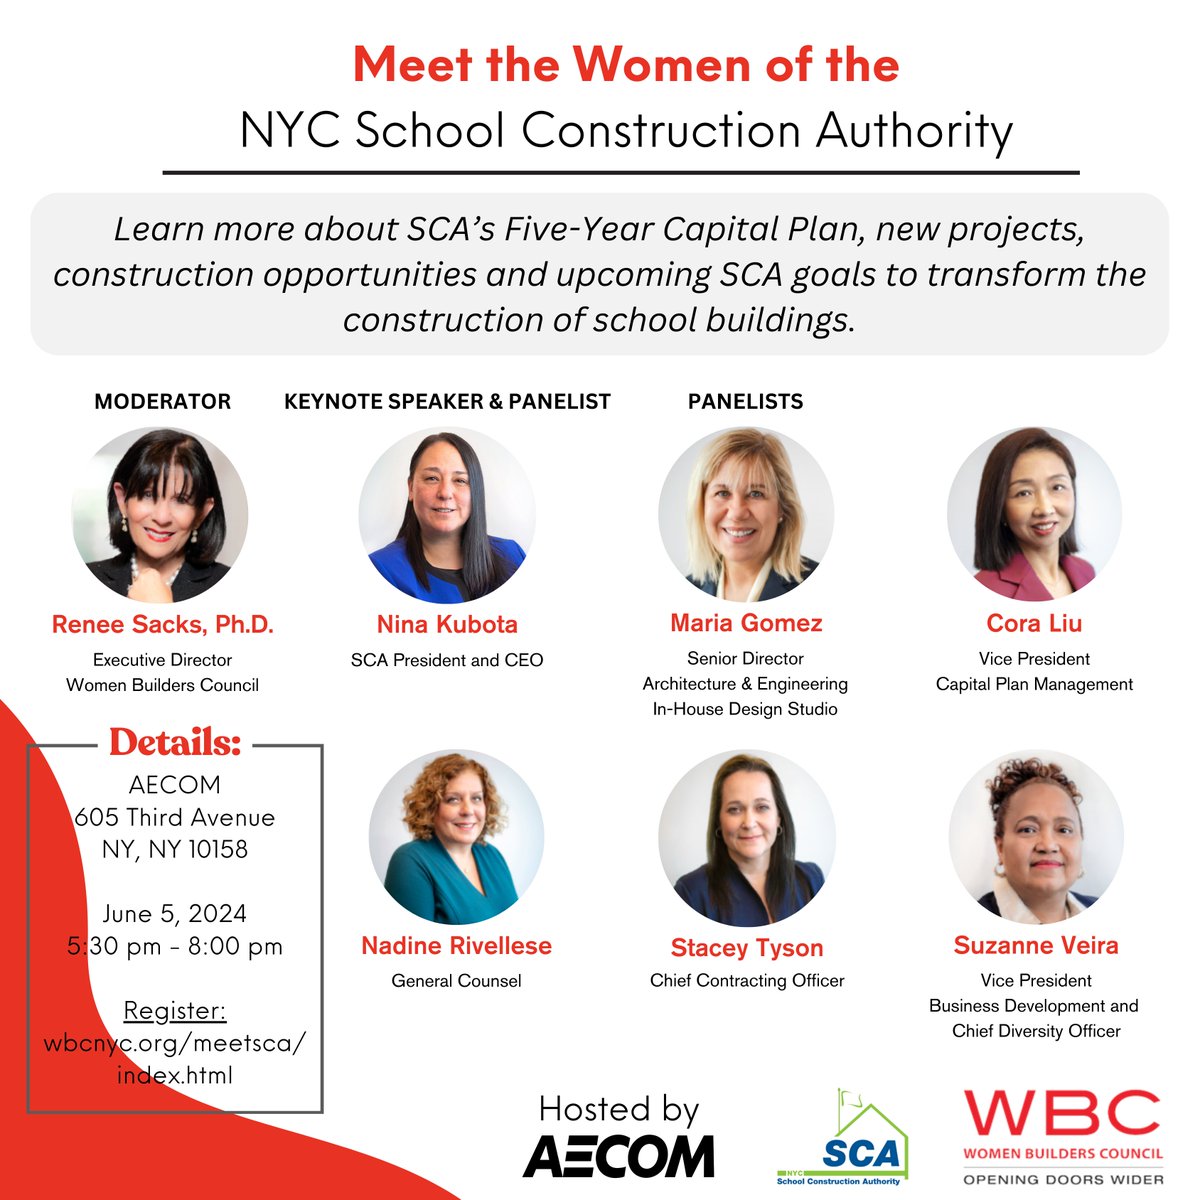 Meet the Women of the SCA! Learn more about the SCA’s Five-Year Capital Plan, new projects, construction opportunities and our upcoming goals to transform the construction of school buildings. See you there! wbcnyc.org/meetsca/index.…

#WomeninConstruction #MeettheWomenoftheSCA